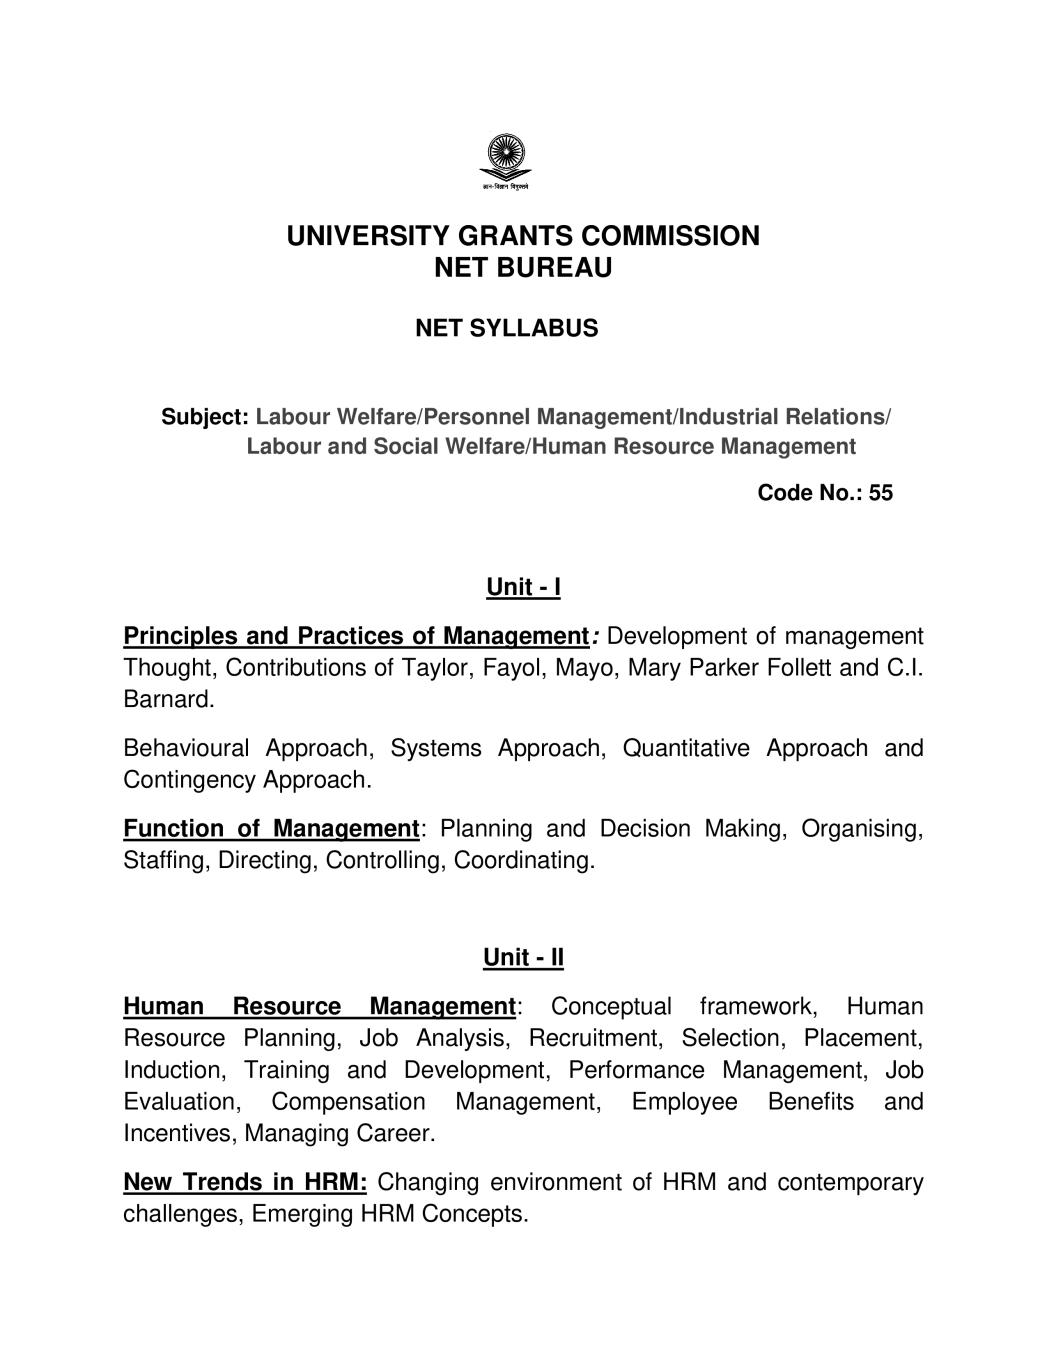 UGC NET Syllabus for Labour Welfare 2020 - Page 1